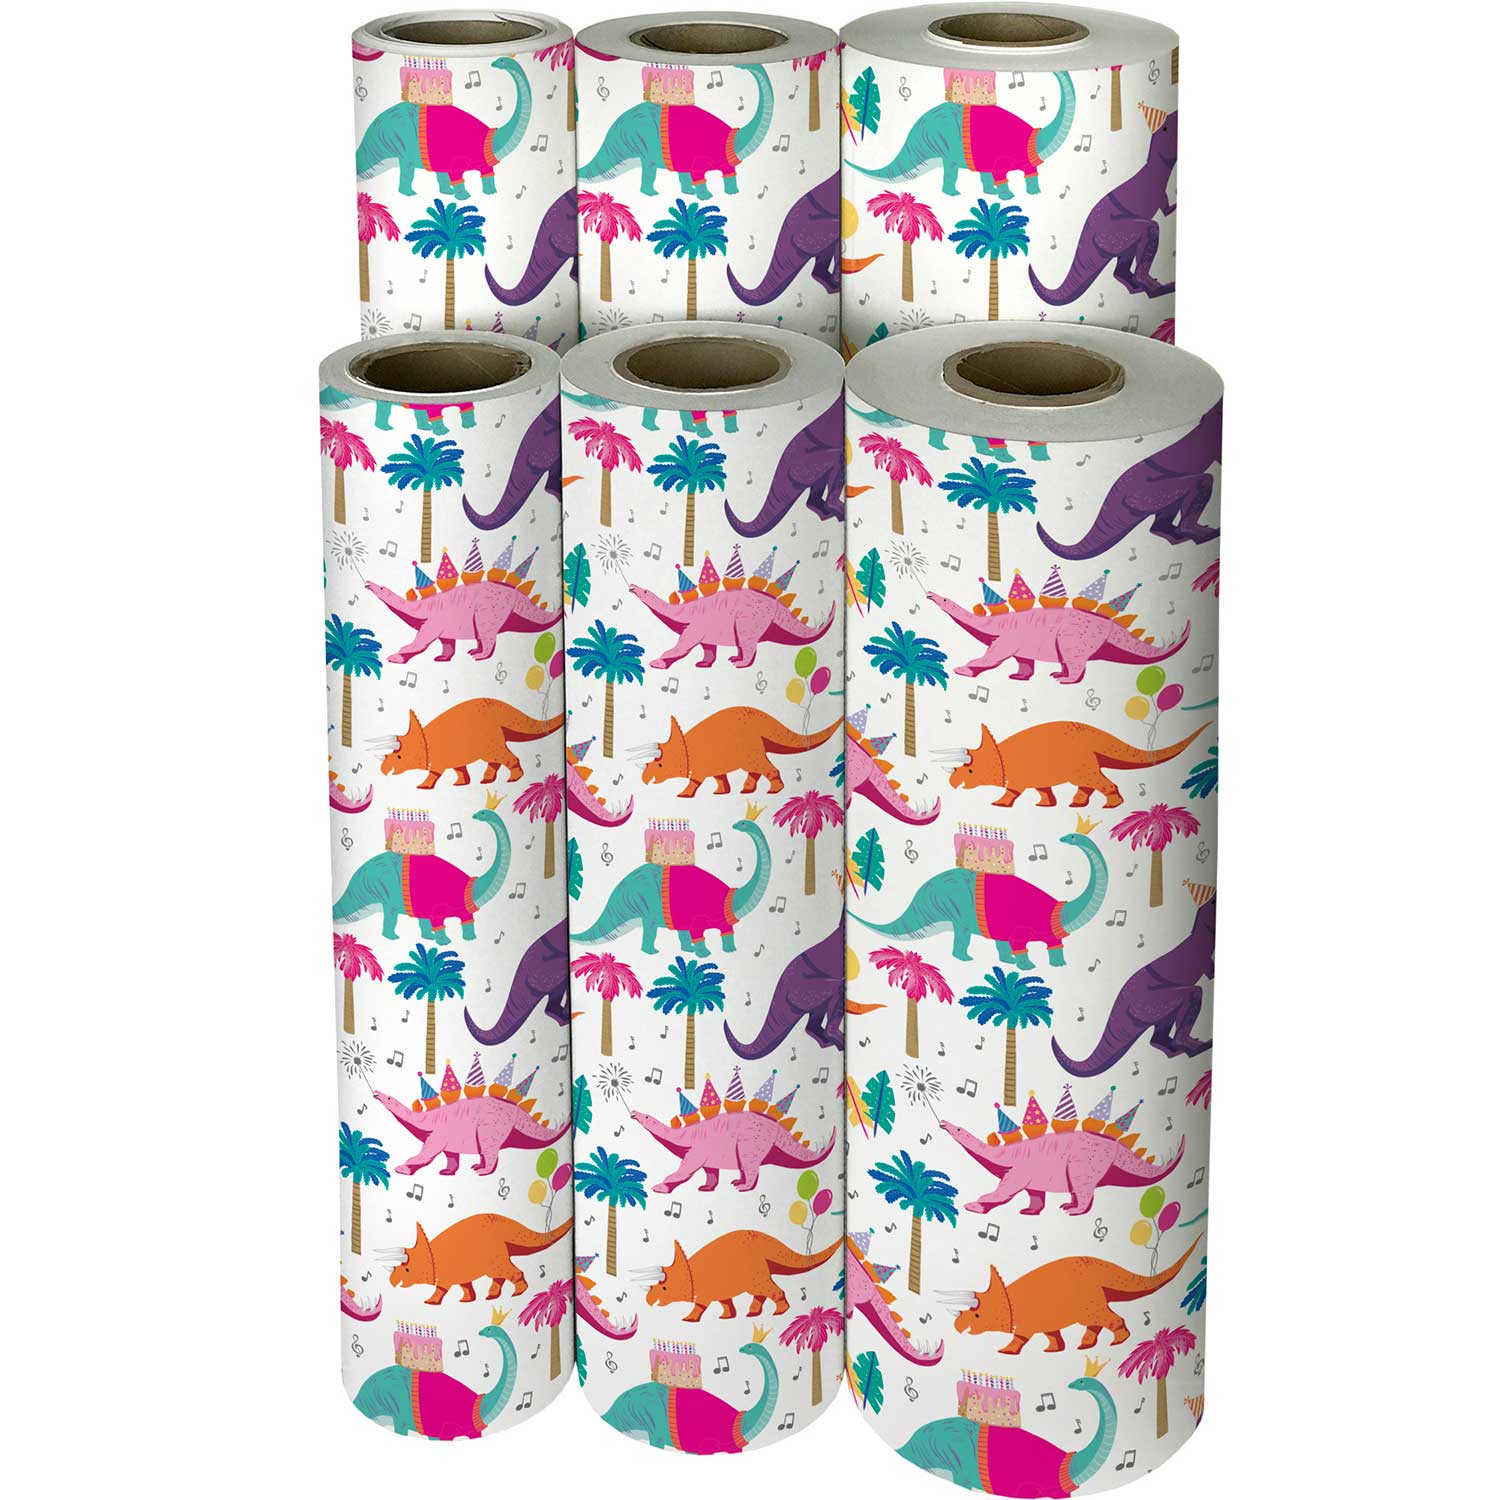 THE DISSOLVABLE BIRTHDAY GIFT WRAP – Plus Products Inc